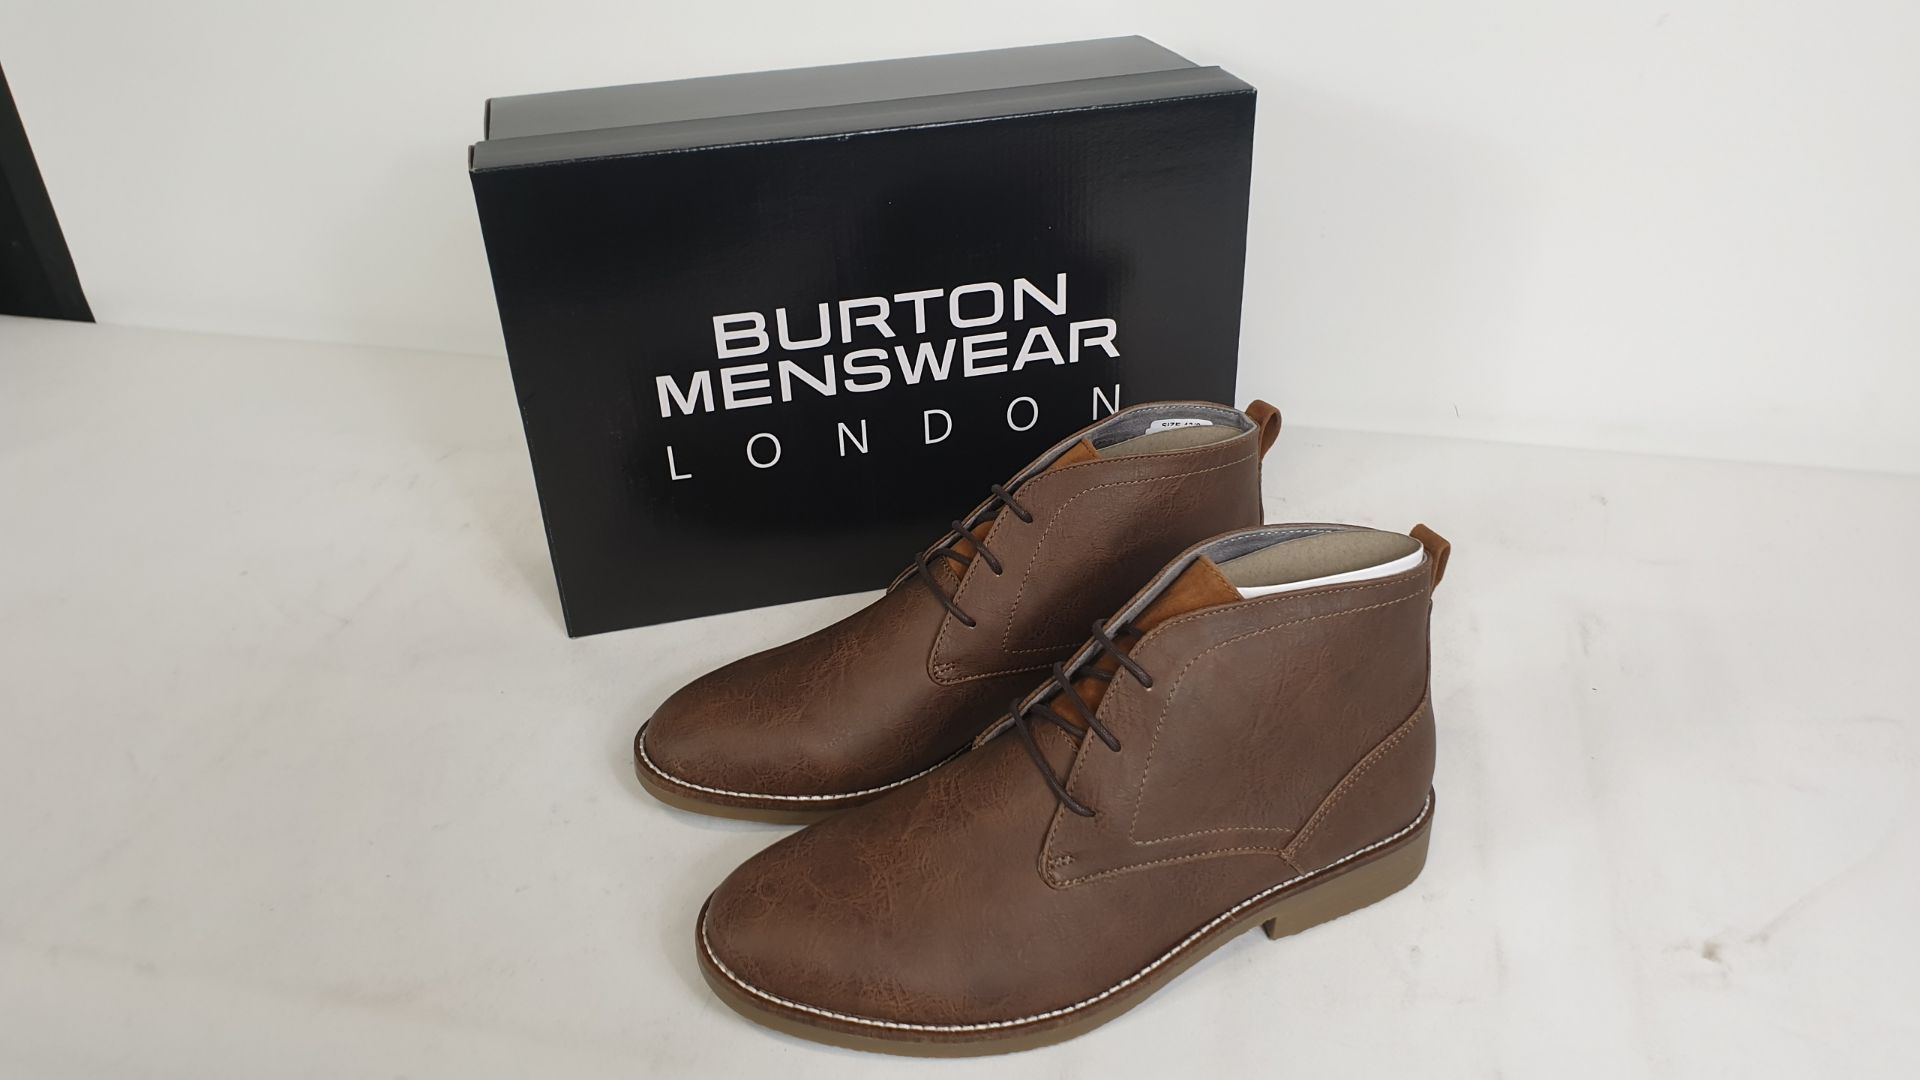 10 X BRAND NEW BOXED PAIRS OF BURTONS MENSWEAR LEATHER LOOK TAN COLOURED CHUKKA BOOTS SIZE 7